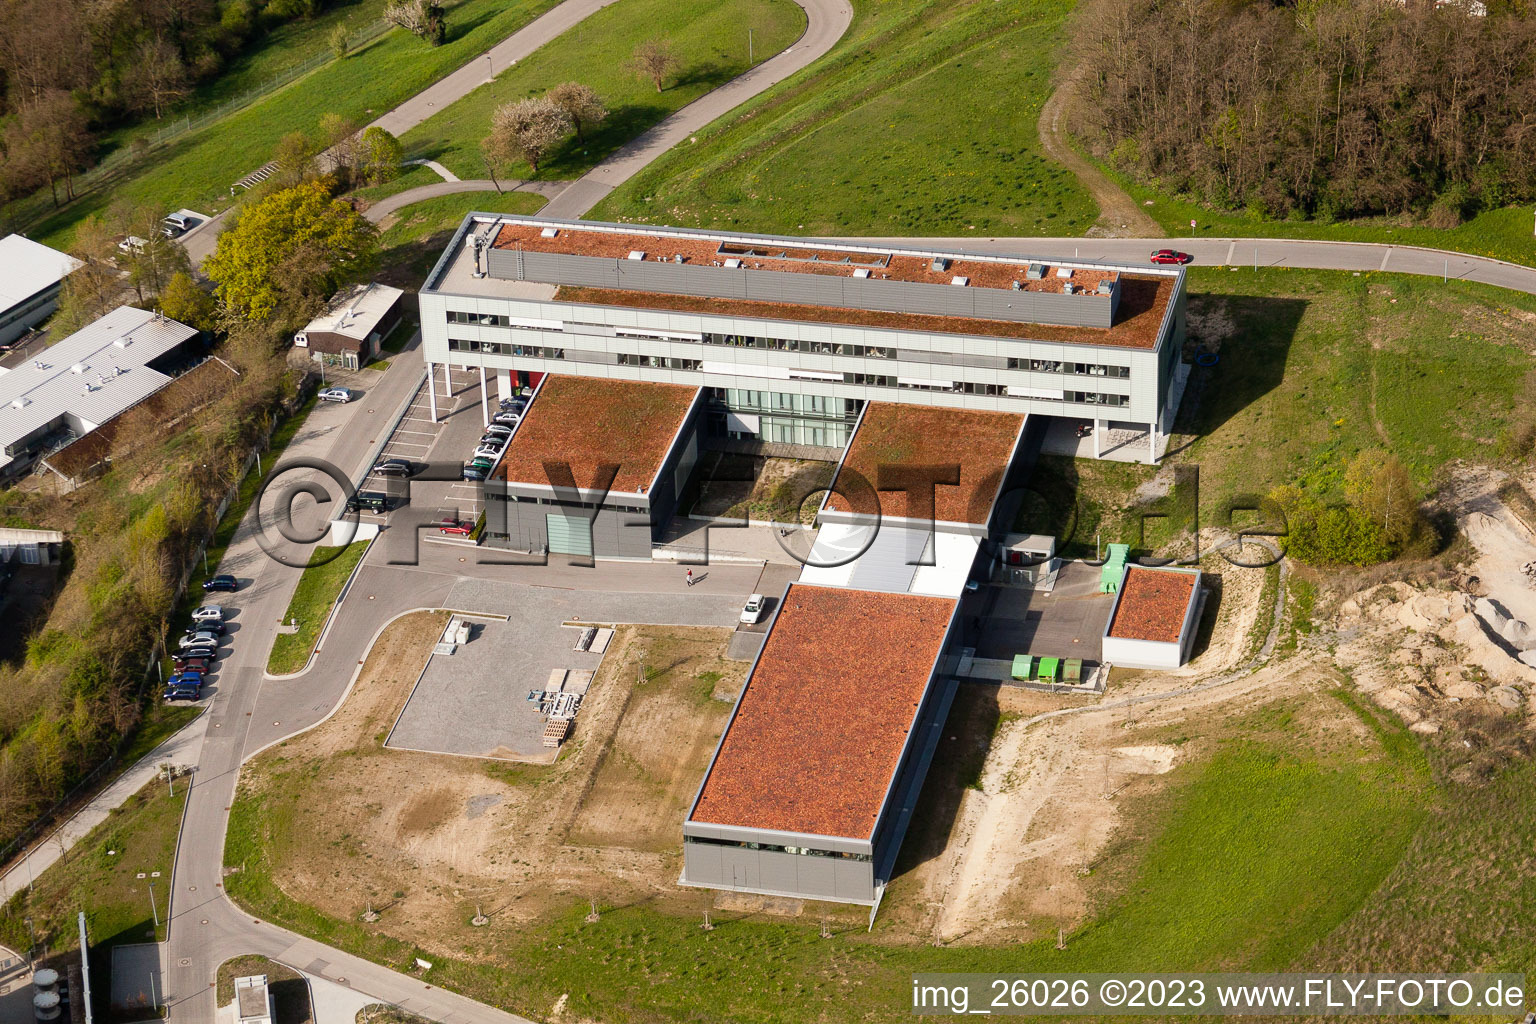 Pfinztal, Fraunhofer Institute for Chemical Technology (ICT) in the district Grötzingen in Karlsruhe in the state Baden-Wuerttemberg, Germany seen from above